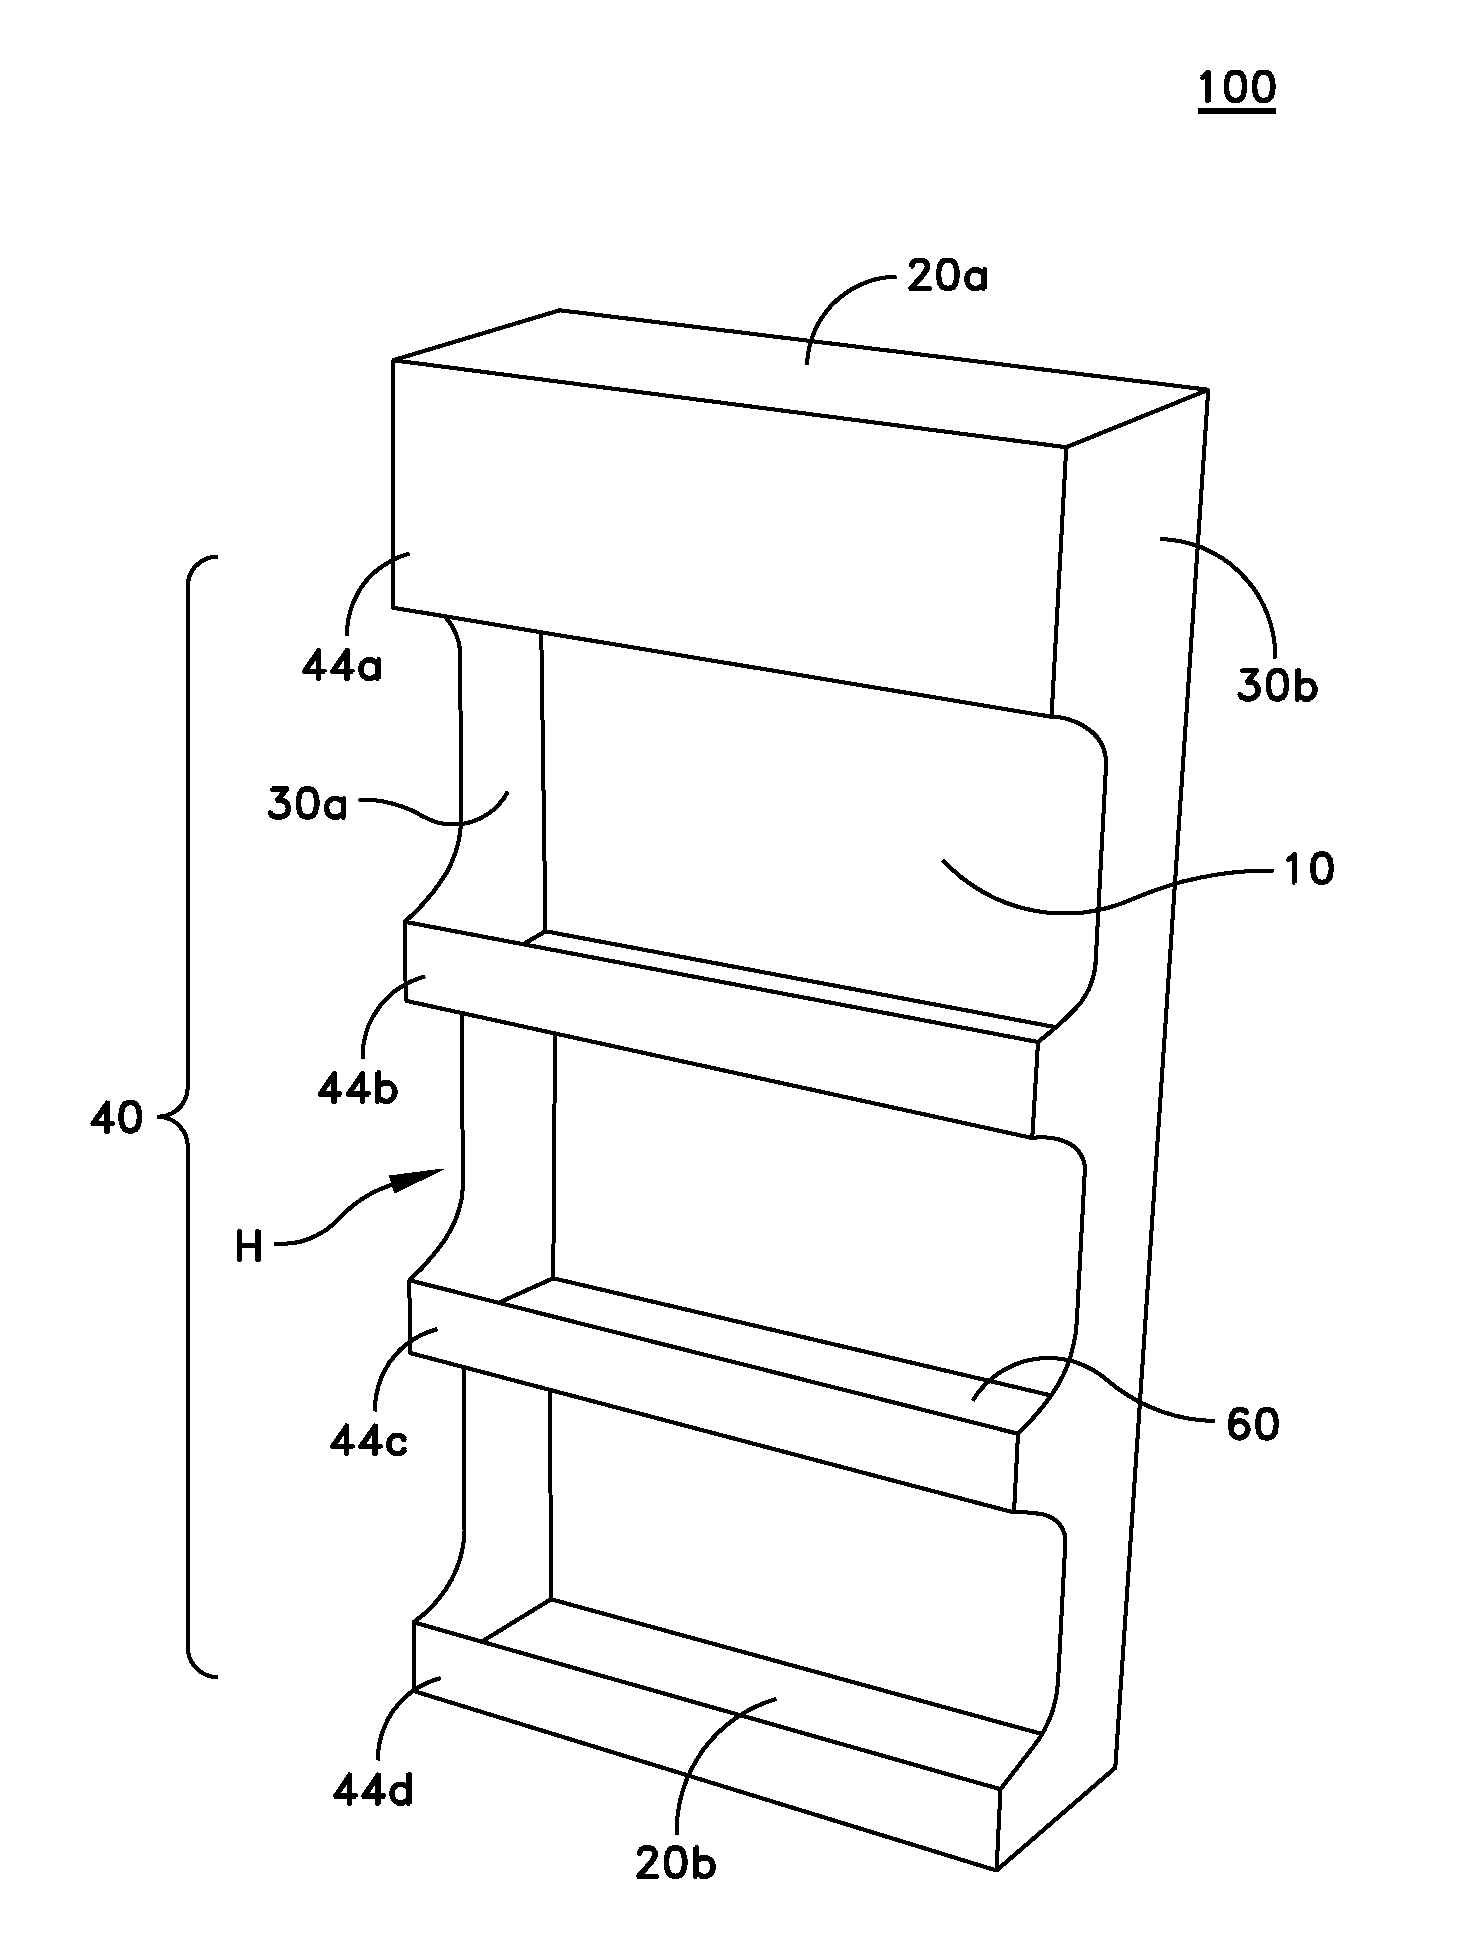 Folded and glued display container having integral shelf elements